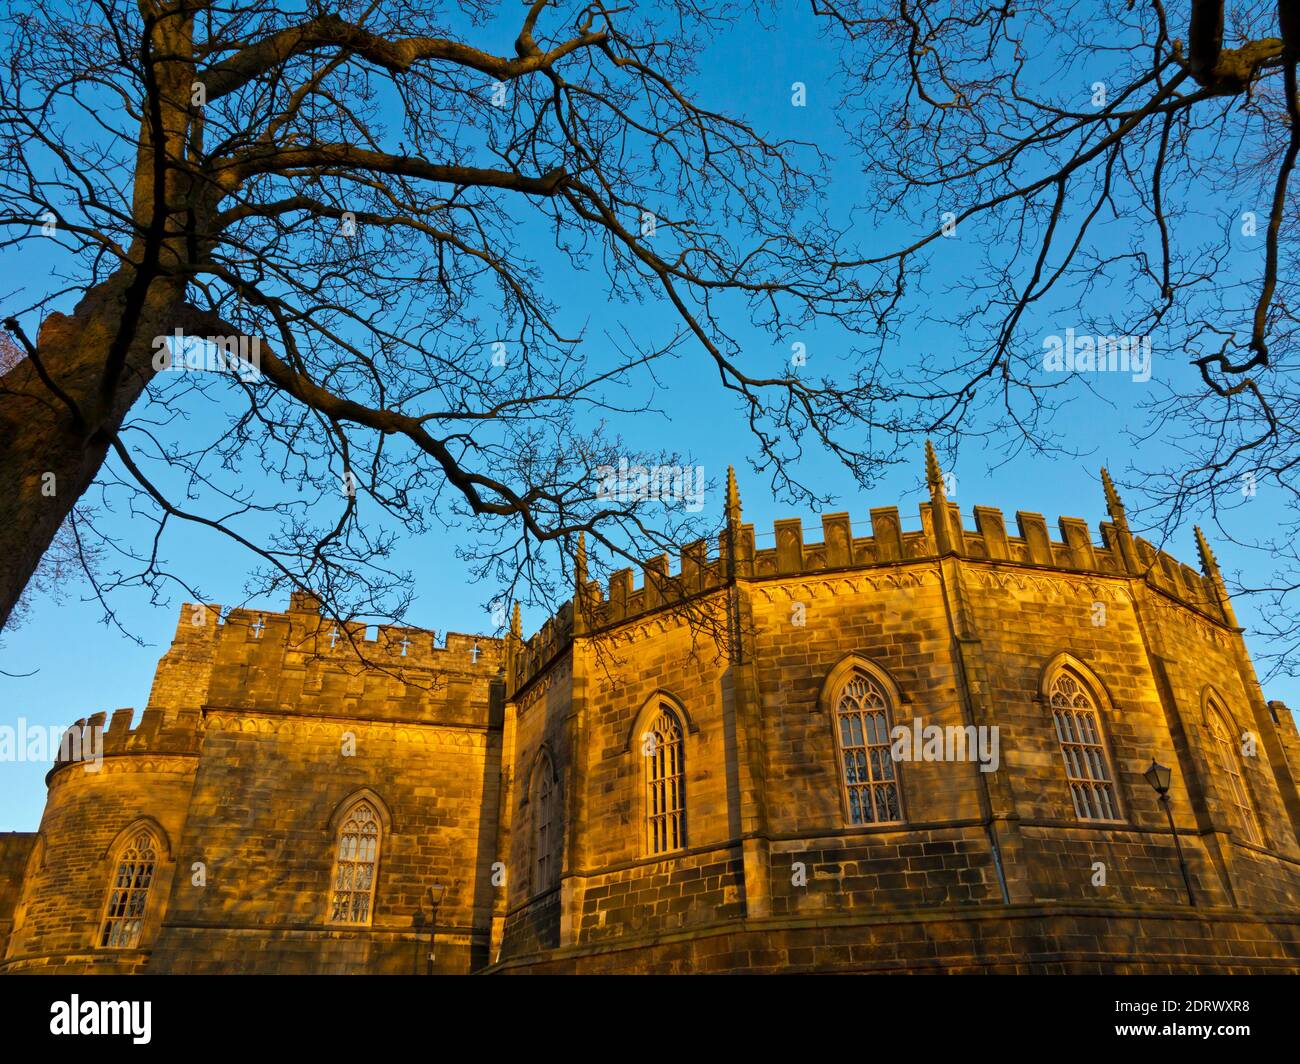 The Gothic style Shire Hall building at Lancaster Castle in the City of Lancaster Lancashire England UK Stock Photo